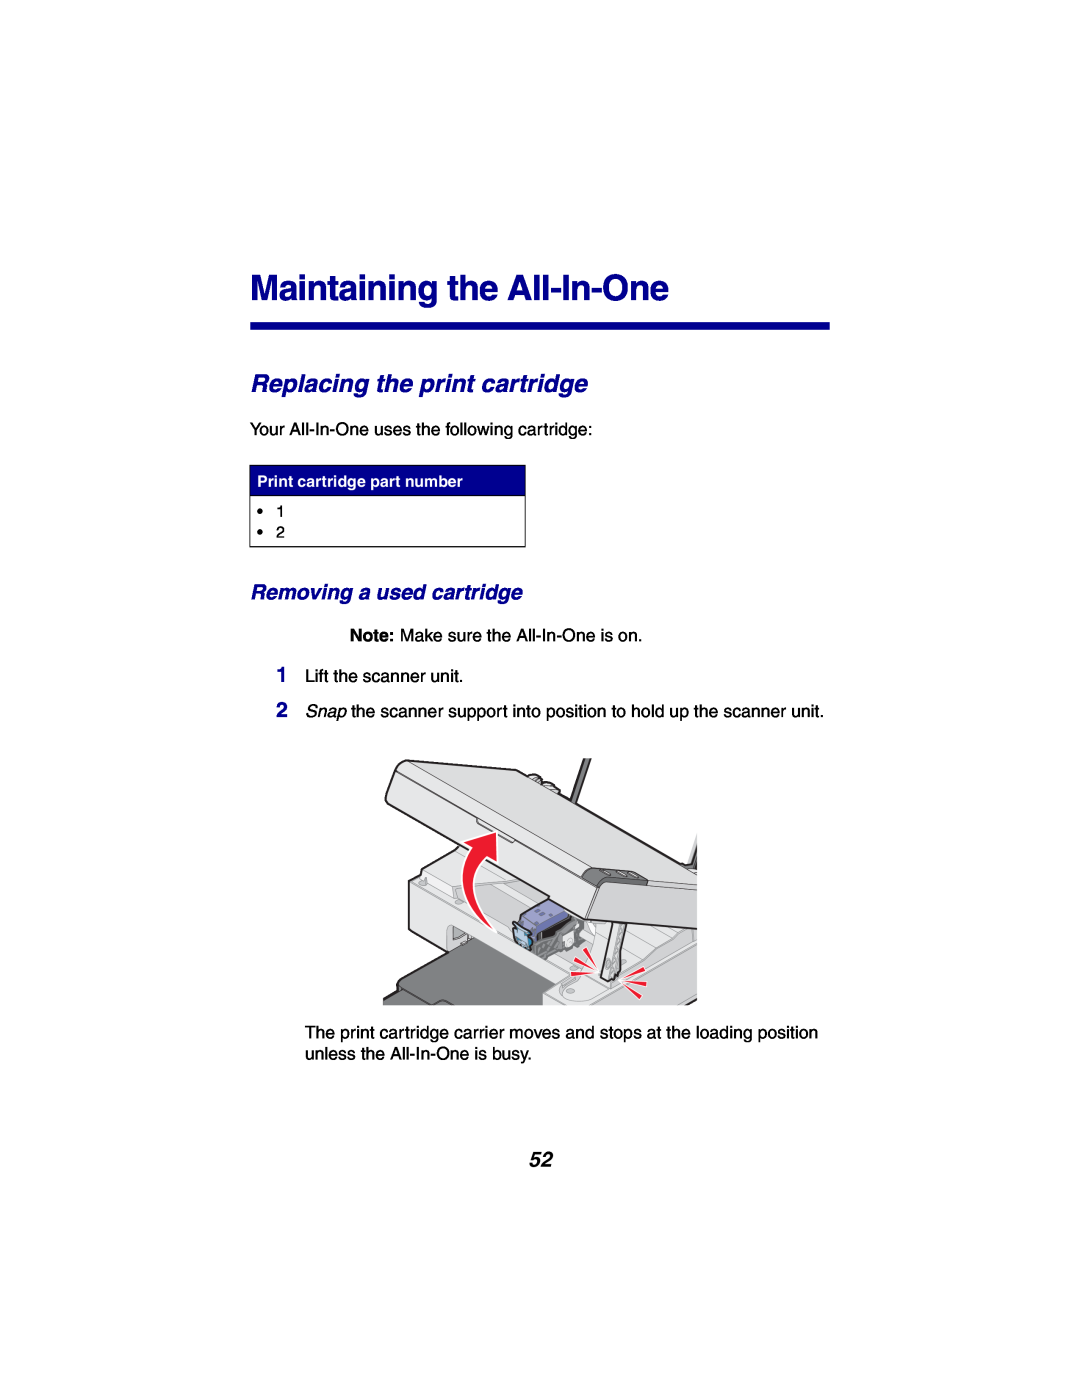 Lexmark X2300 Series manual Maintaining the All-In-One, Replacing the print cartridge, Removing a used cartridge 